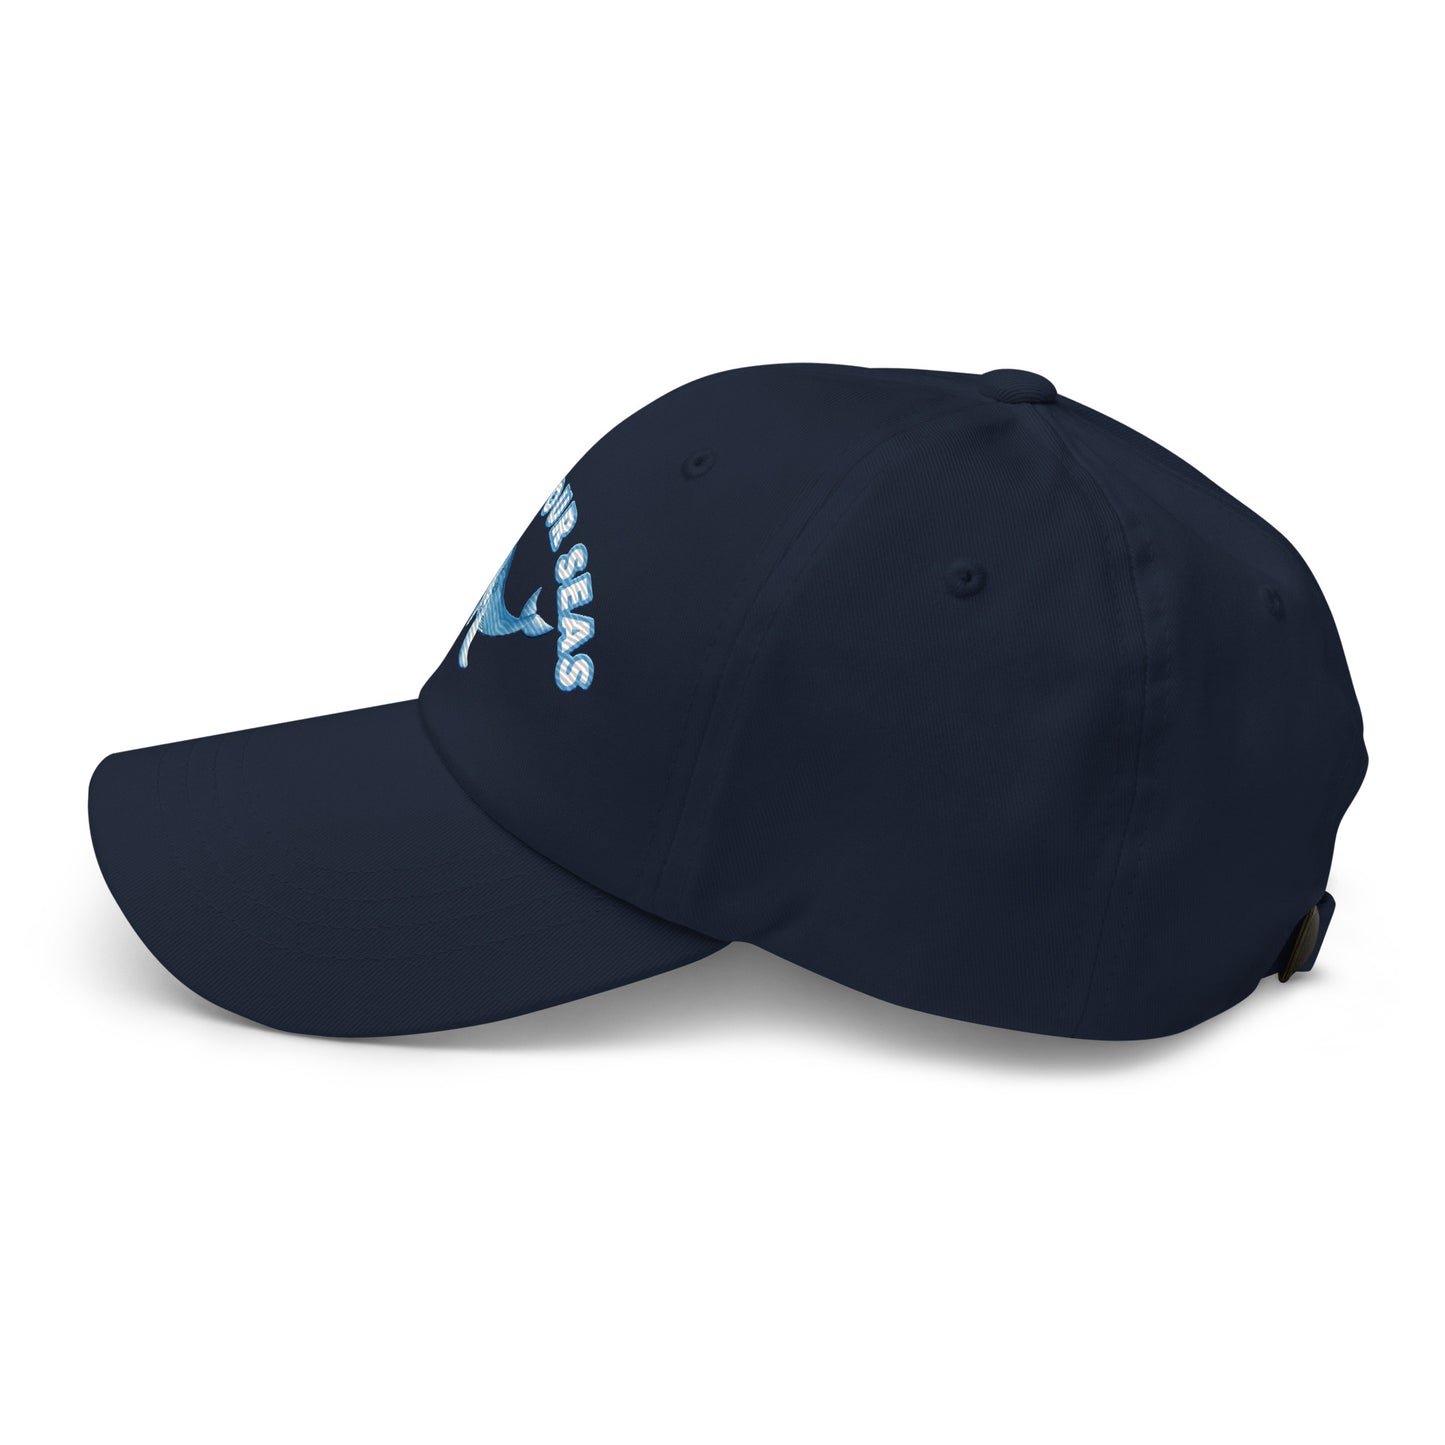 Save Our Seas Whale Dad hat: Pulls 4 pounds of ocean plastic!